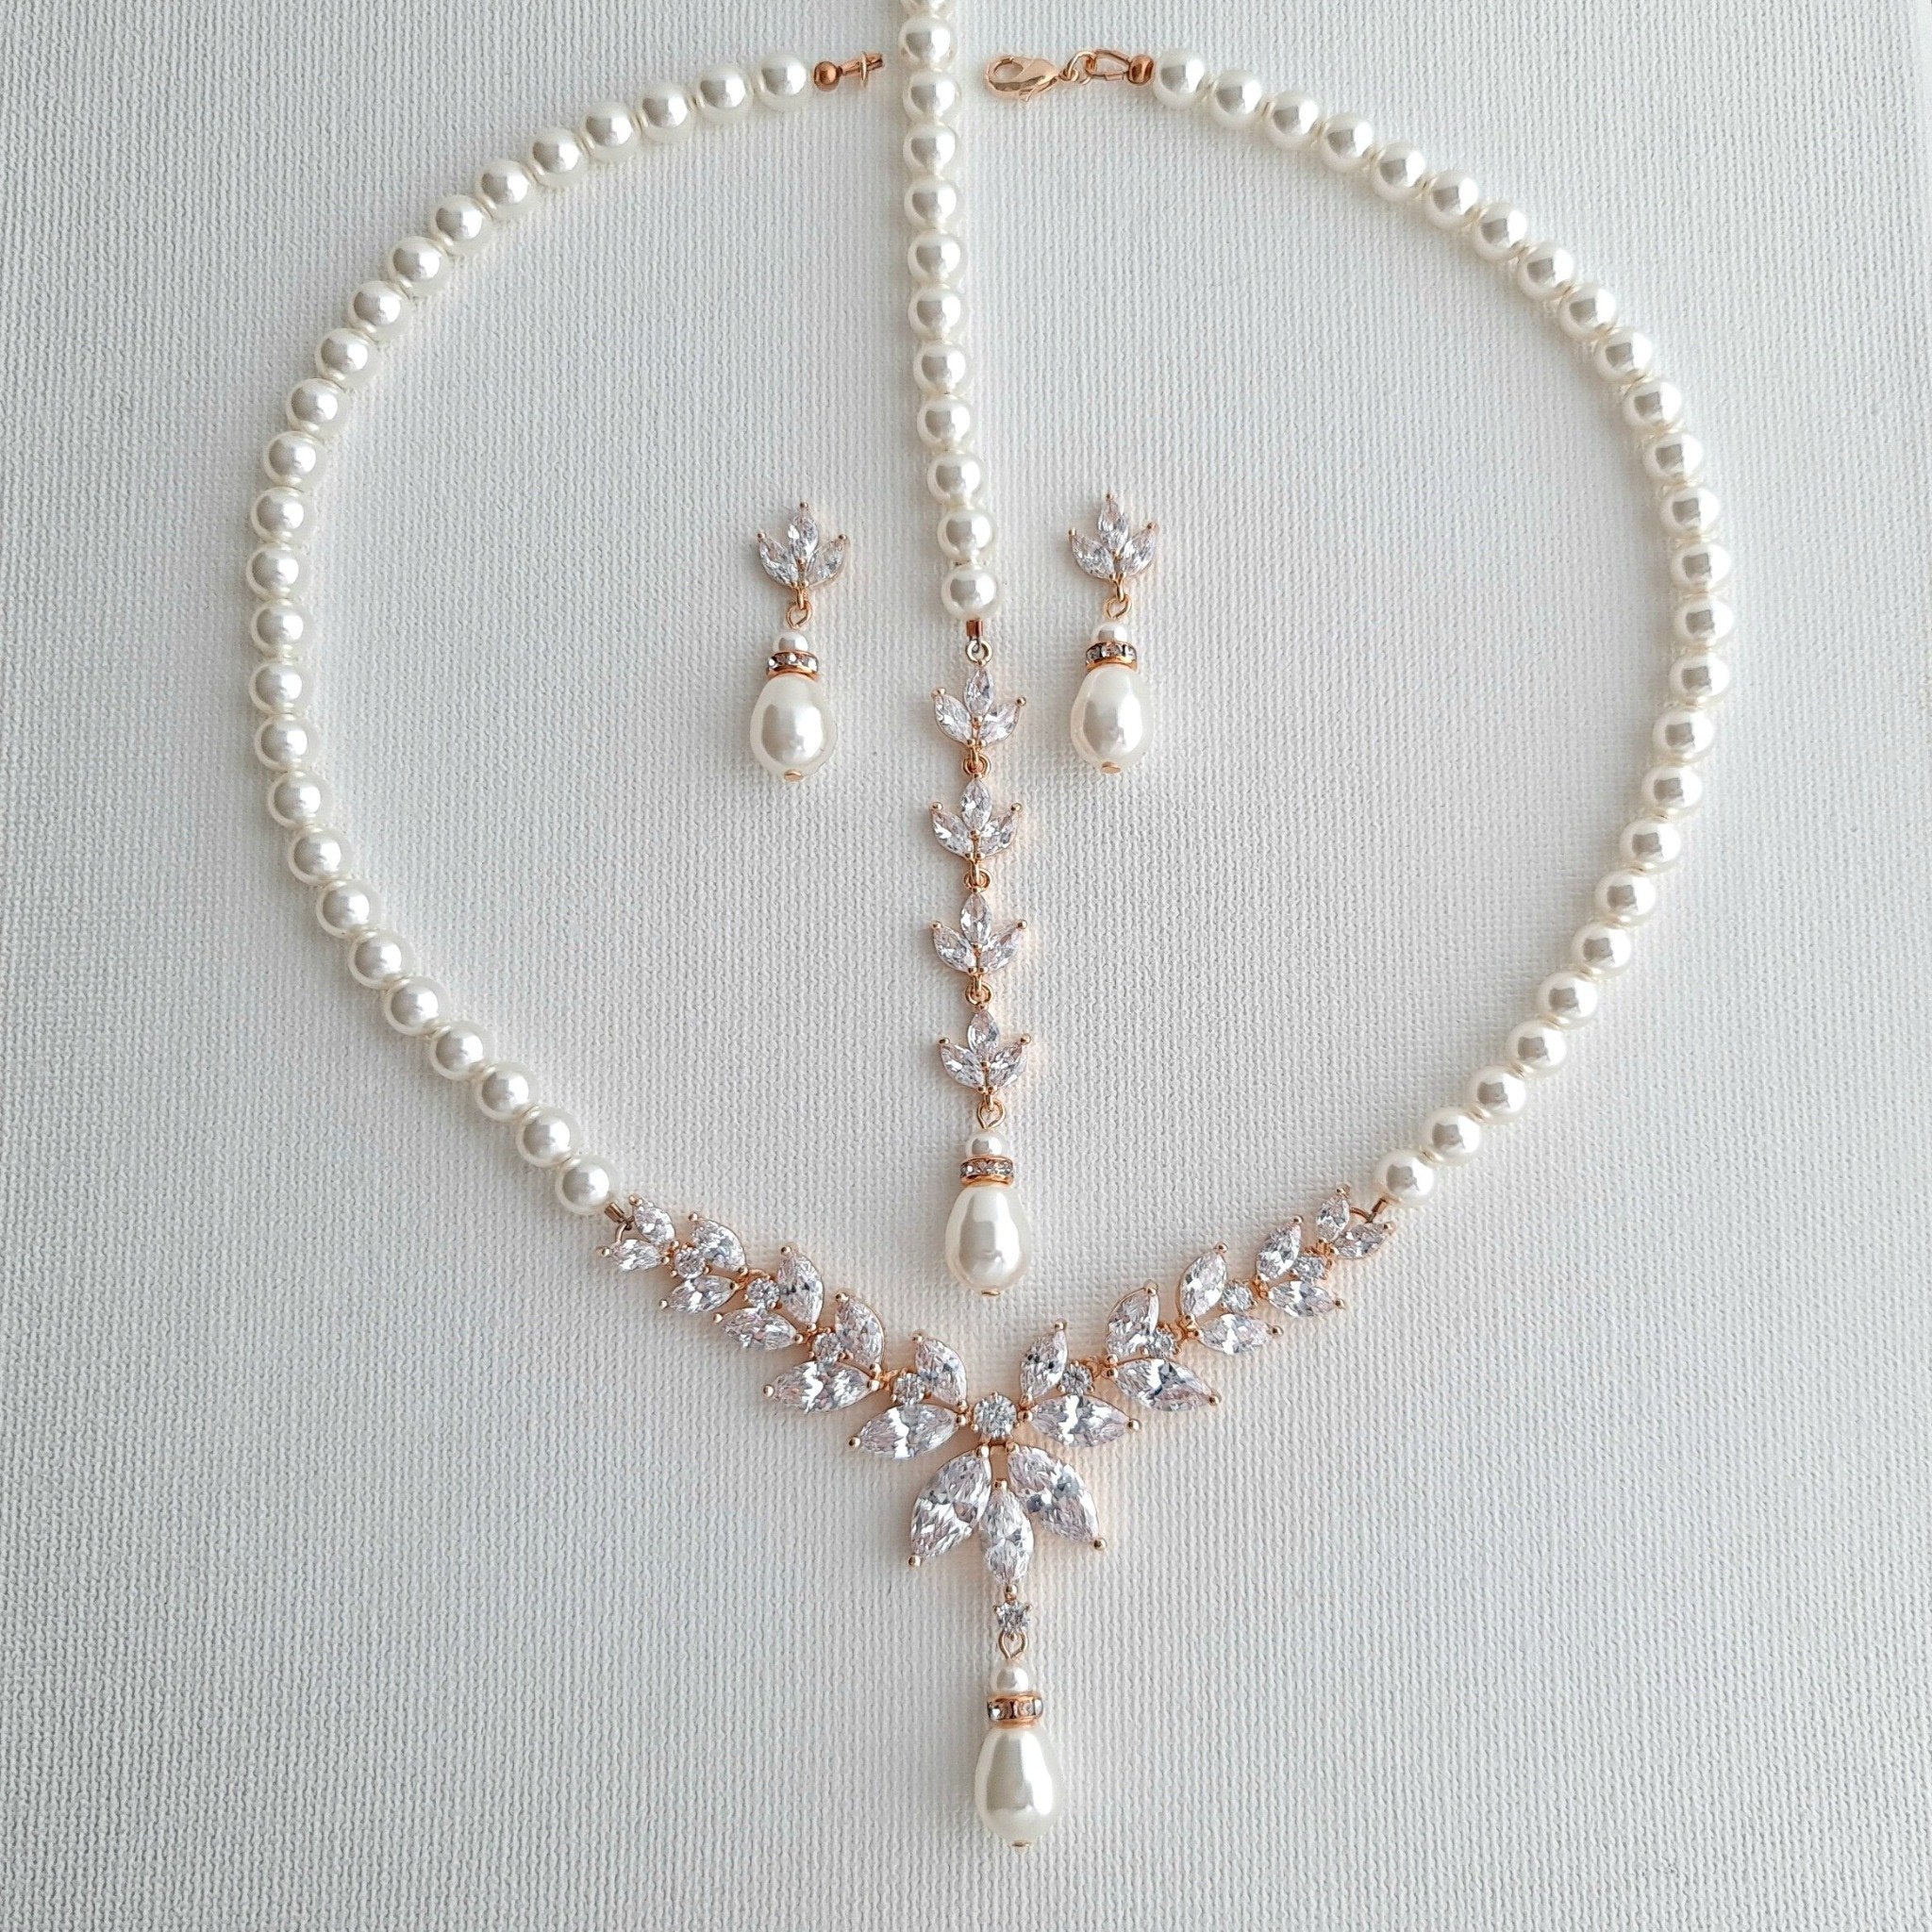 Pearl Necklace With Earrings Jewelry Set for Wedding in Rose Gold ...